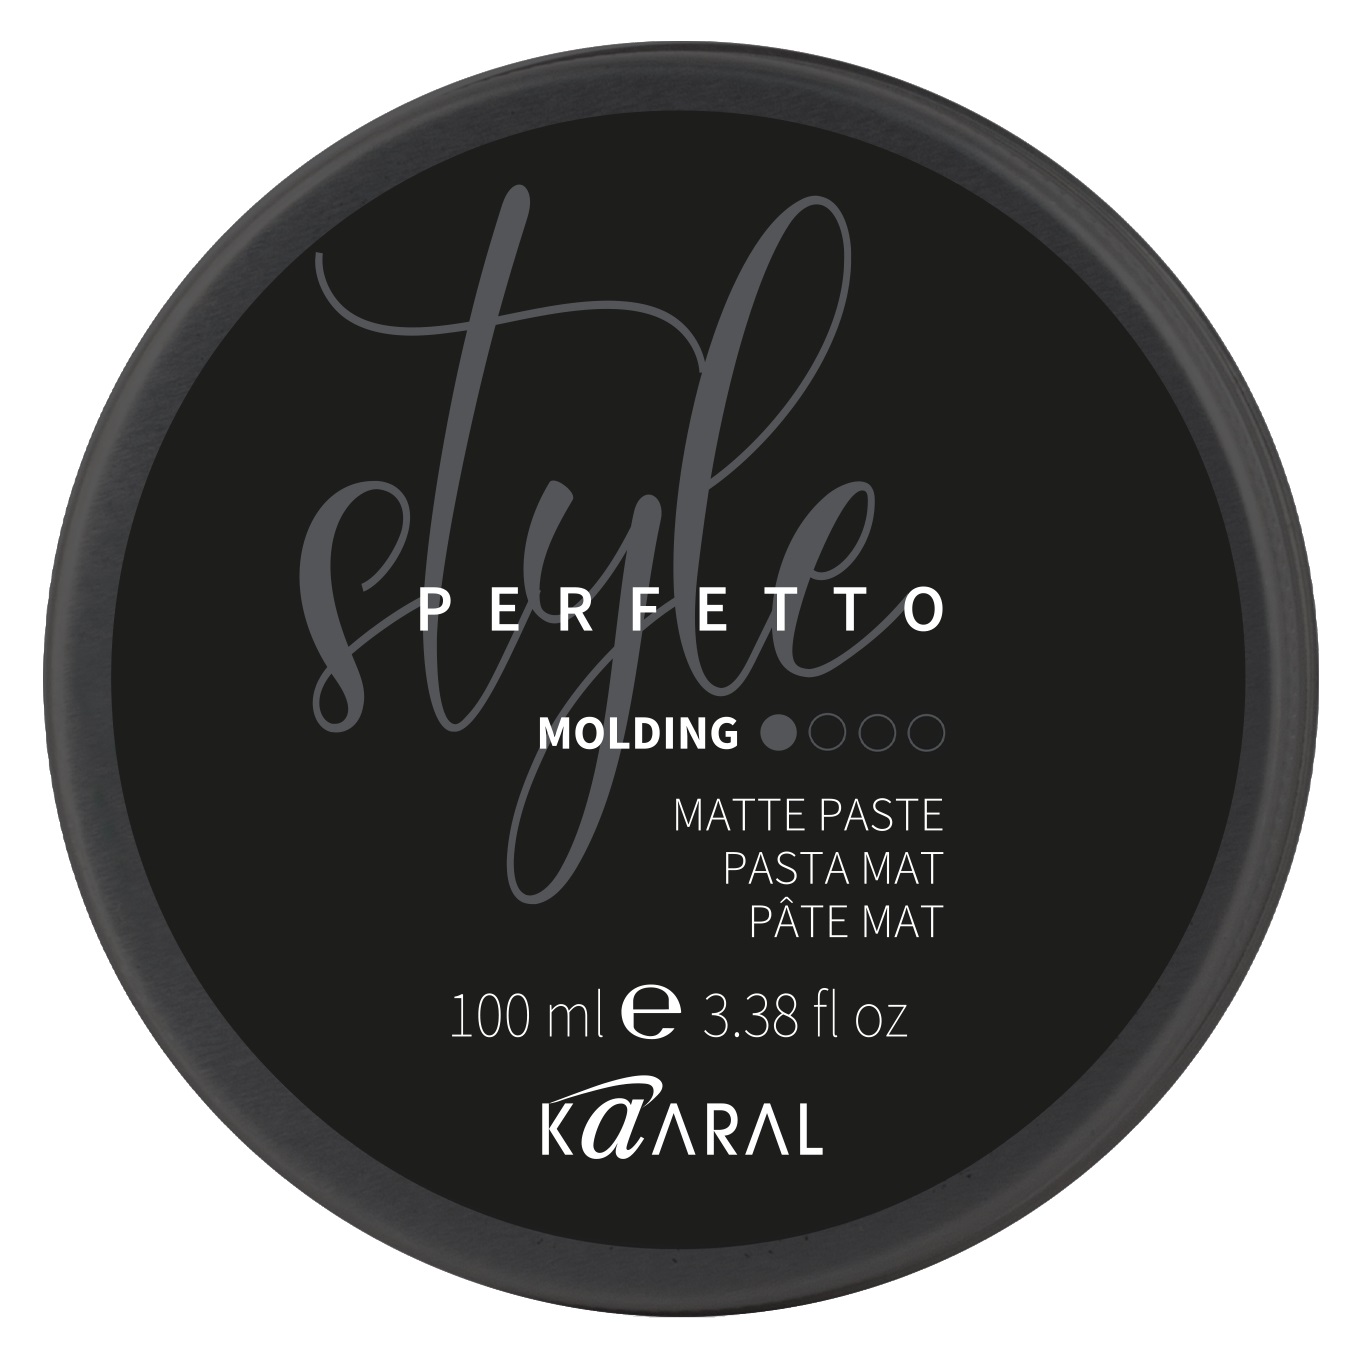 Kaaral Матовая паста Molding Matte Paste, 100 мл (Kaaral, Style Perfetto) kaaral матовая паста molding matte paste 100 мл kaaral style perfetto